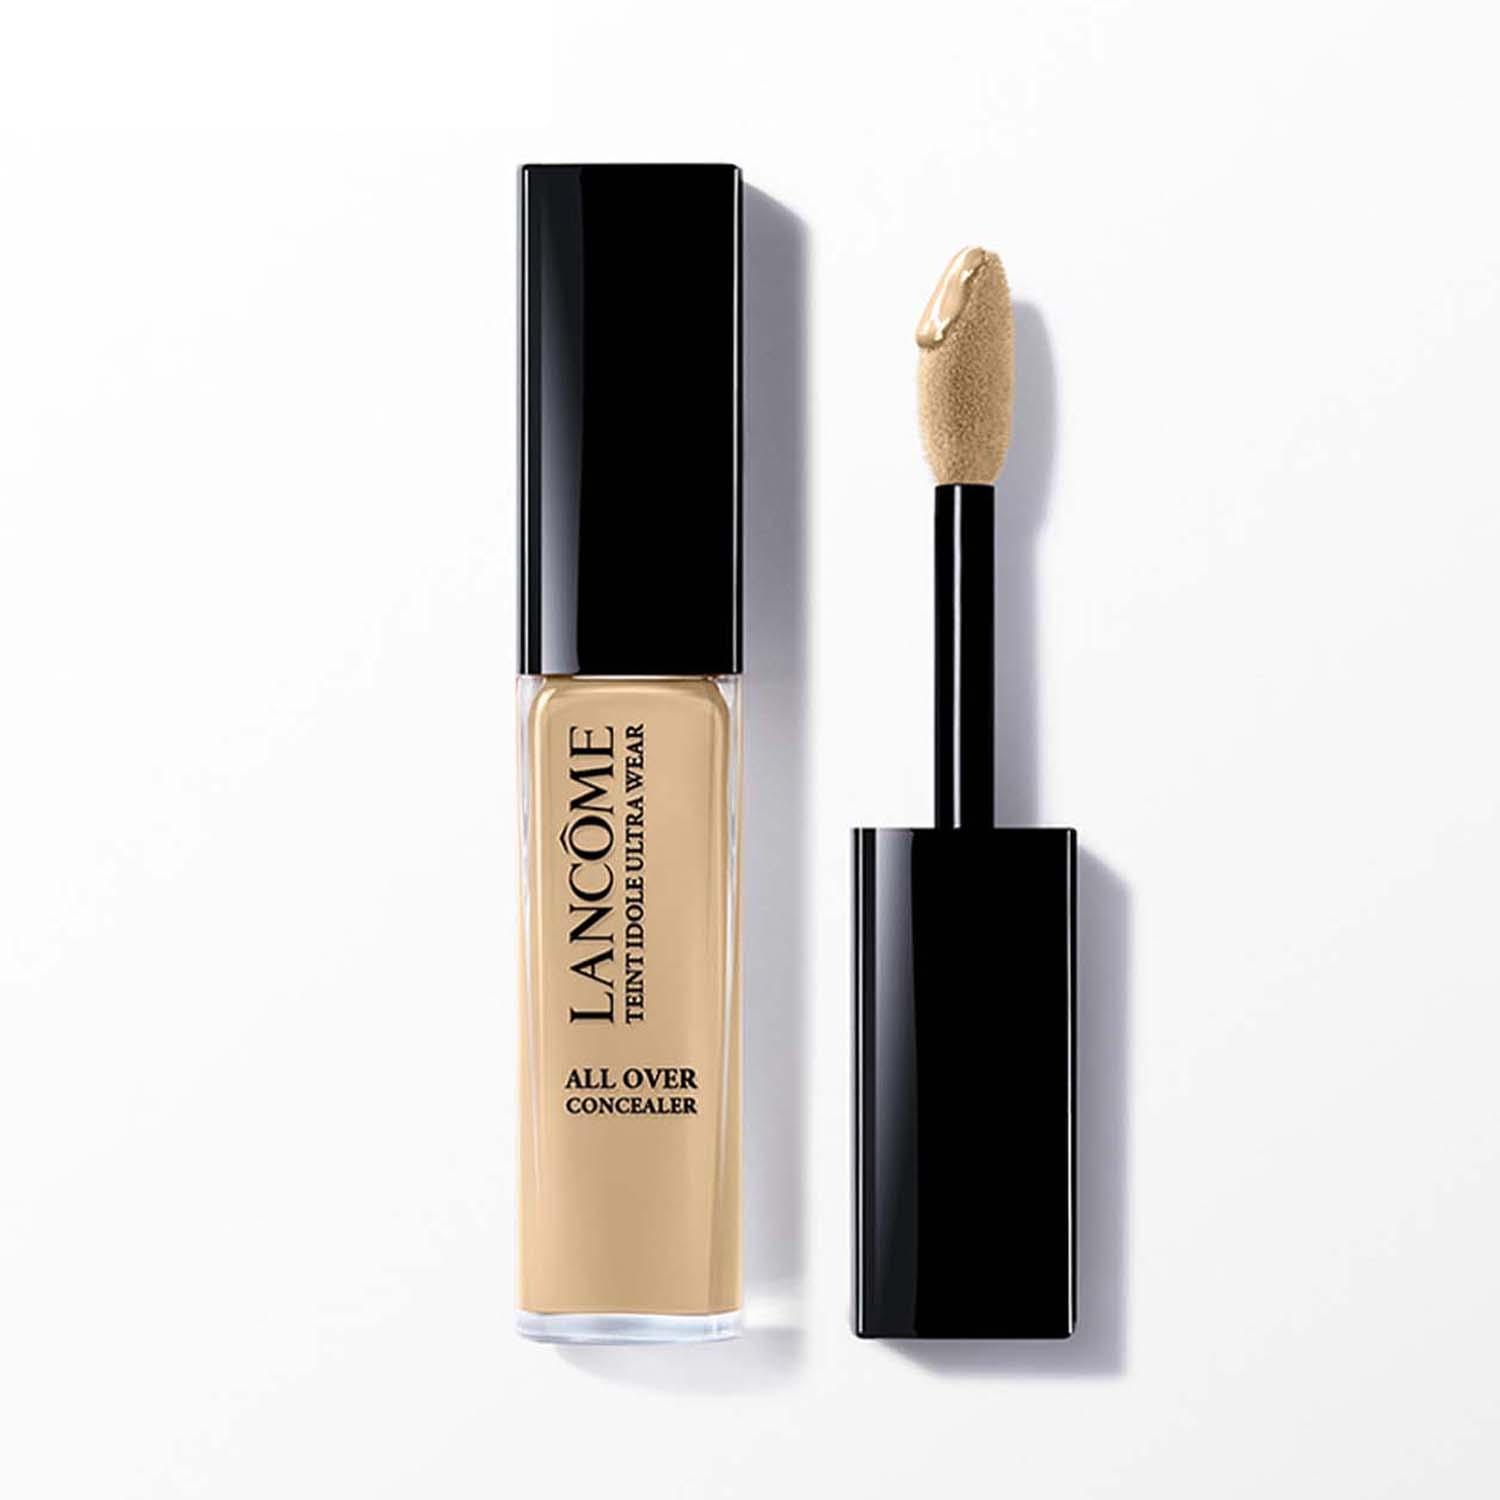 Lancome | Lancome Teint Idole Ultra Wear All Over Multi-Tasking Concealer - 025 Beige Lin-250 Bisque W (13ml)